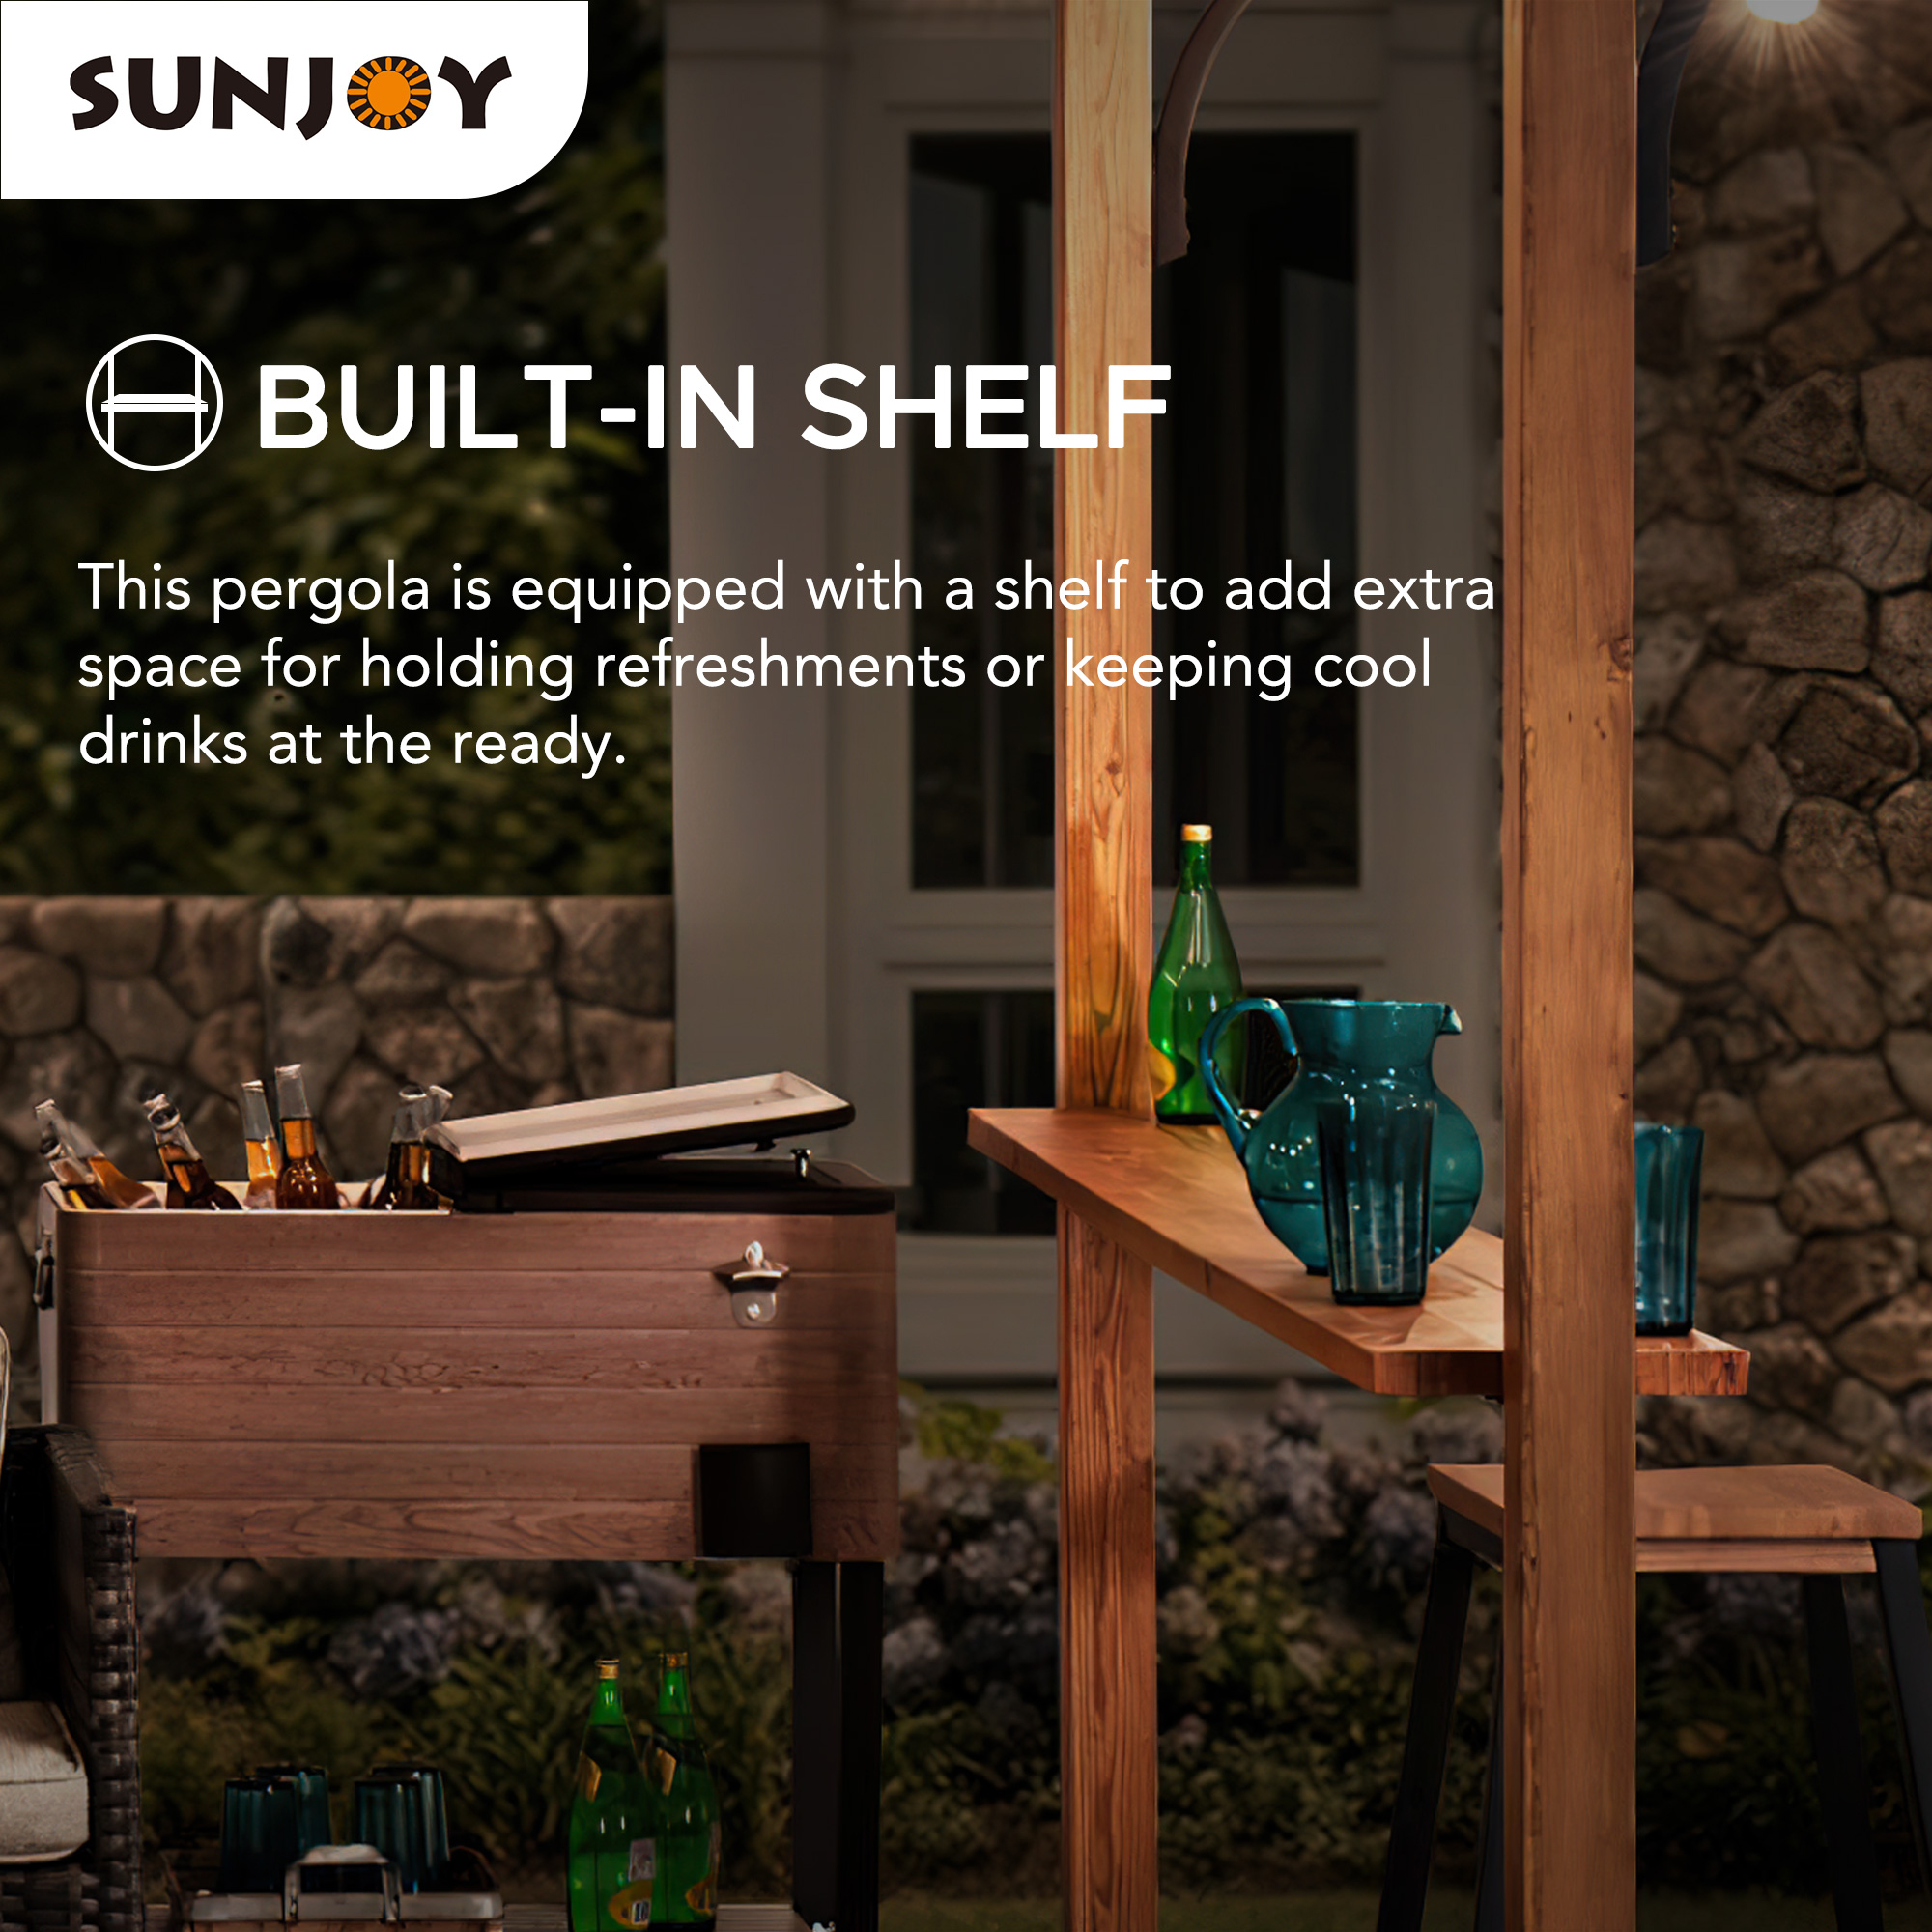 Sunjoy Beechhurst 8.5 ft. x 13 ft. Steel Arched Pergola with Natural Wood Looking Finish and Tan Shade - image 2 of 9